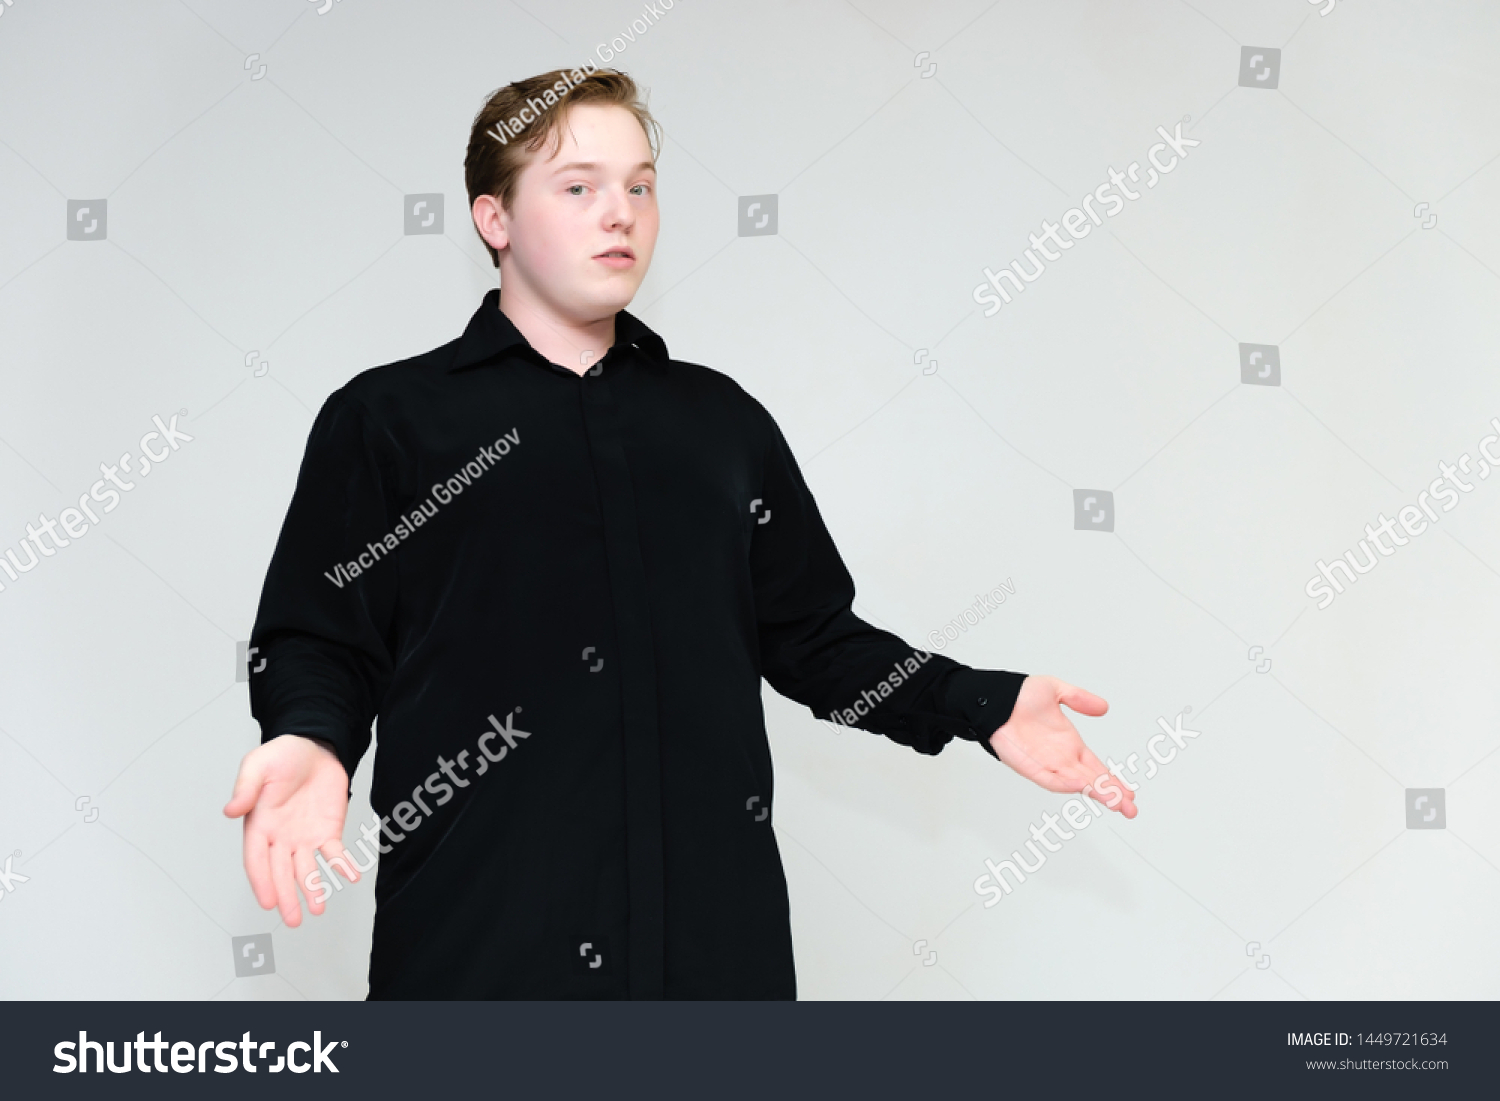 Portrait to the waist on a white background of a handsome young man in a black shirt. stands directly in front of the camera in different poses, talking, showing emotions, showing hands. #1449721634